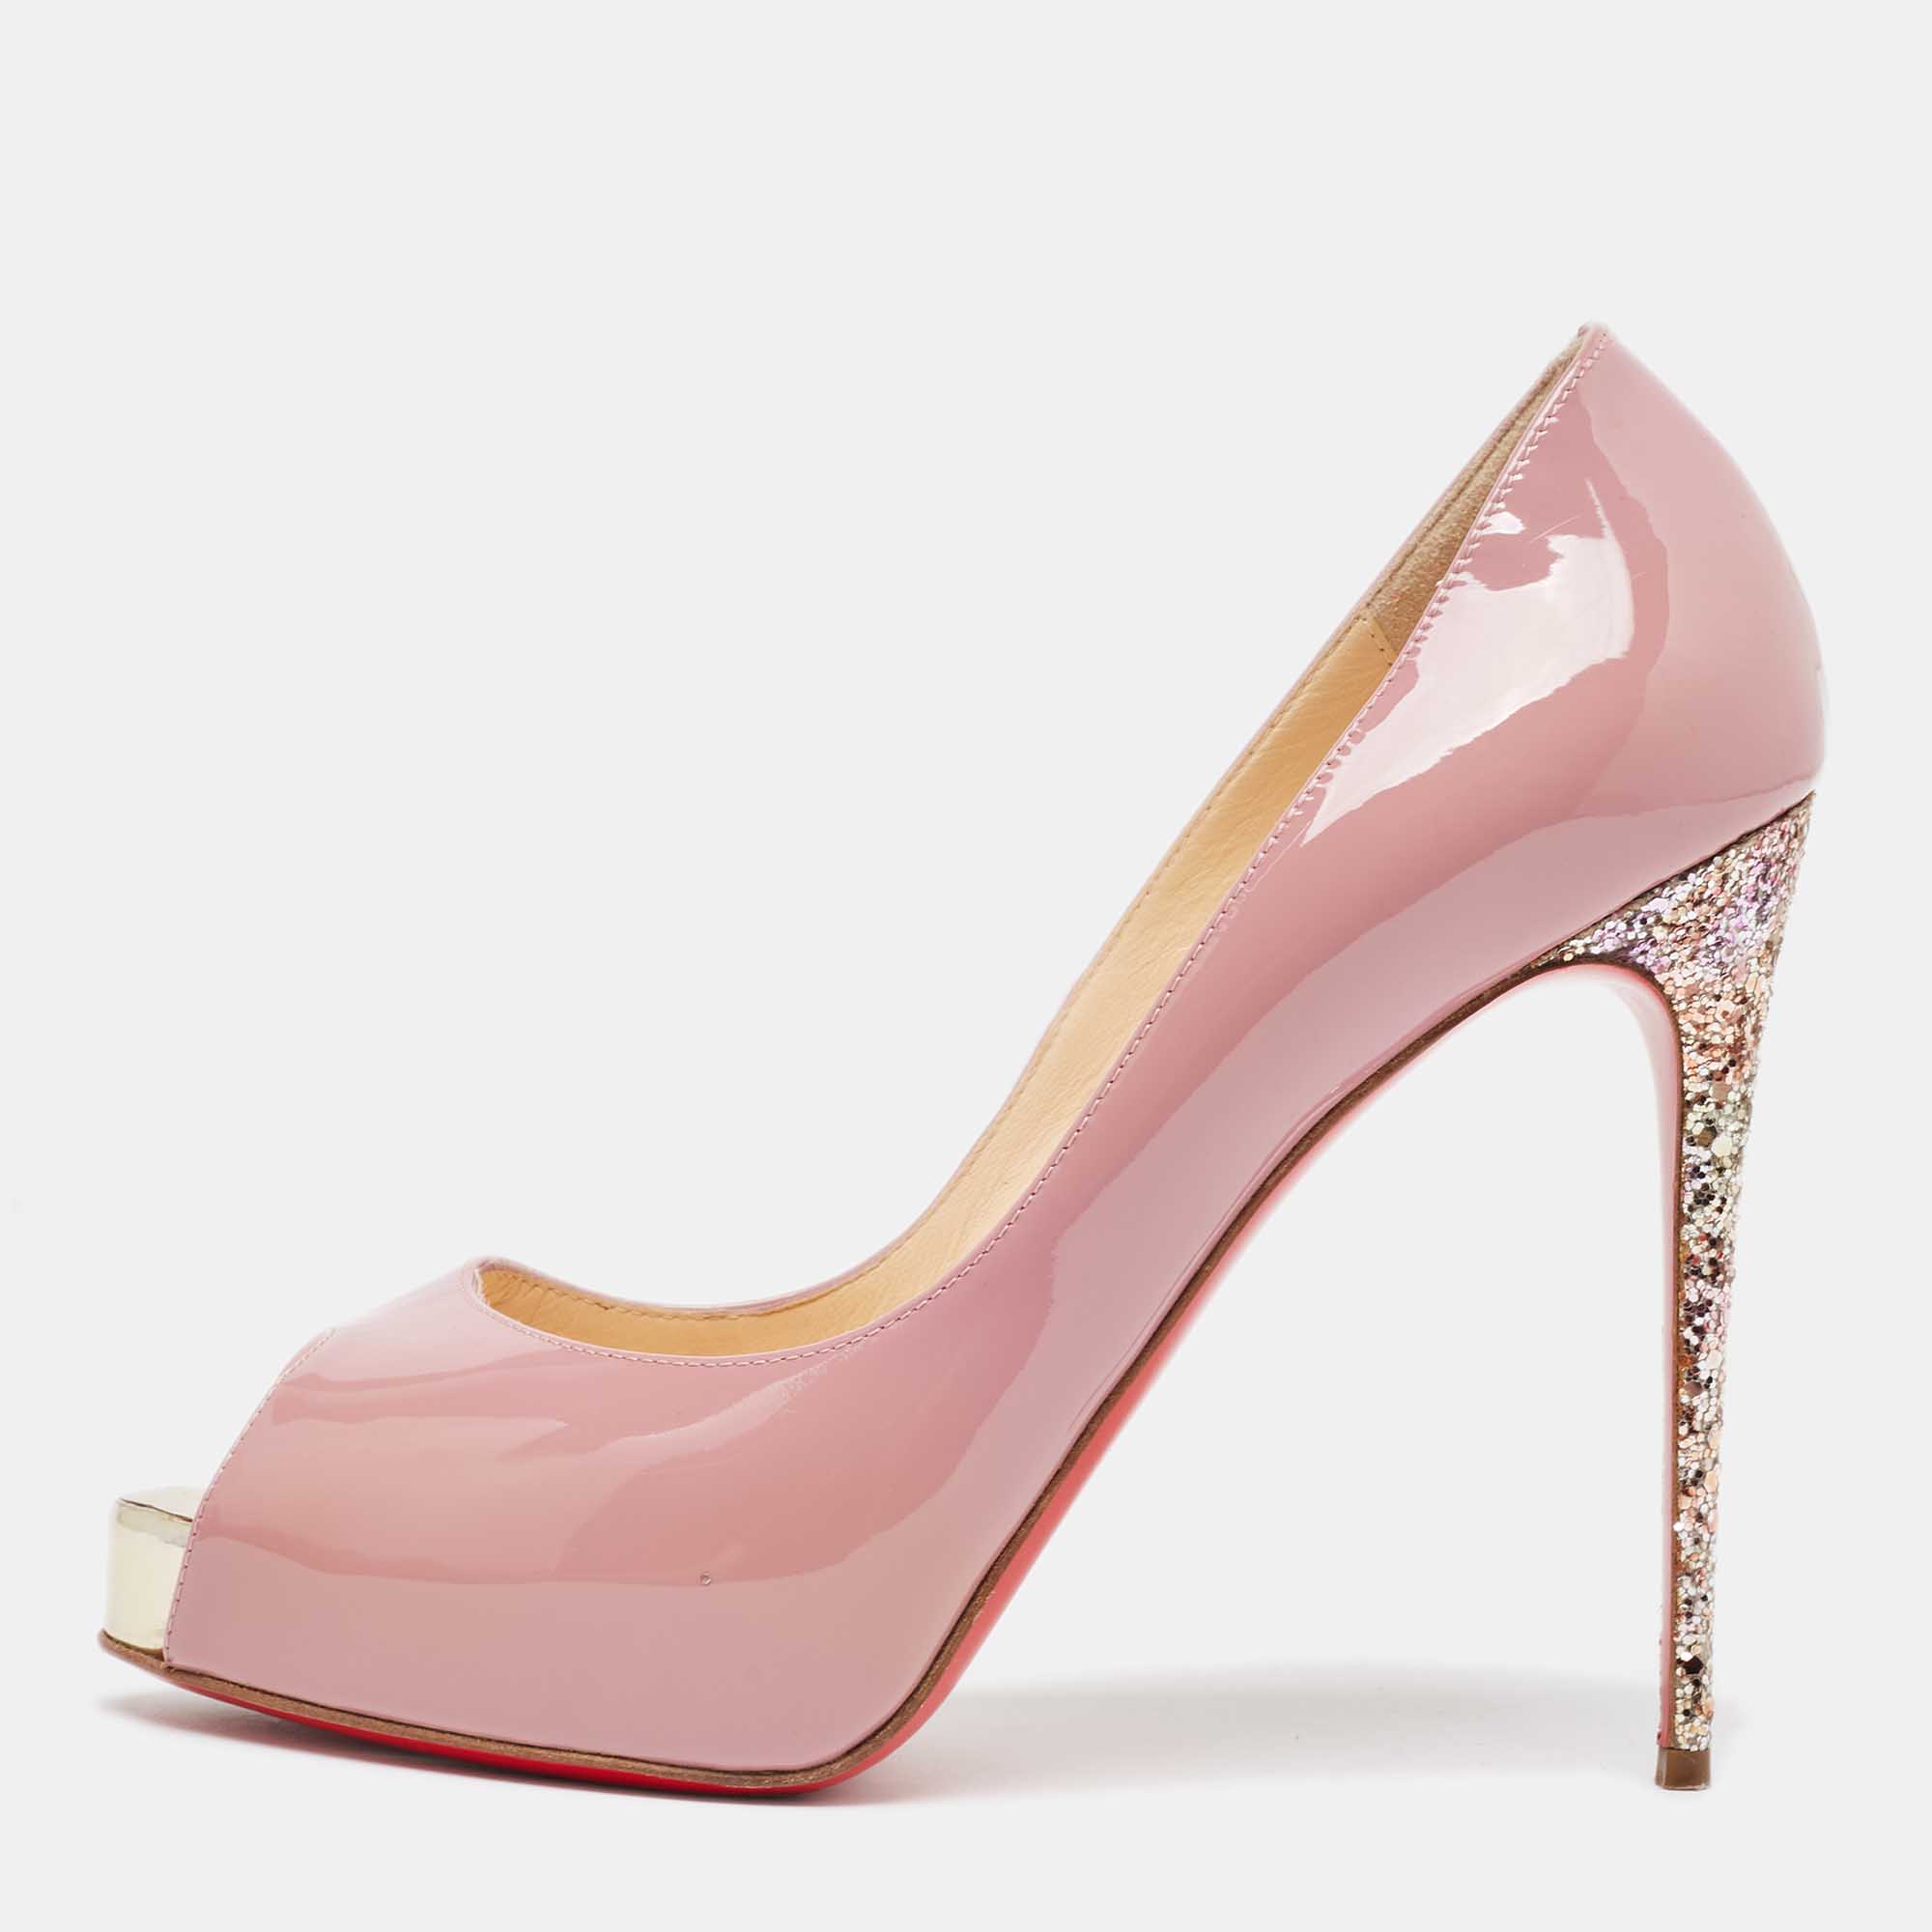 Christian louboutin pink patent leather new very prive glitter pumps size 37.5